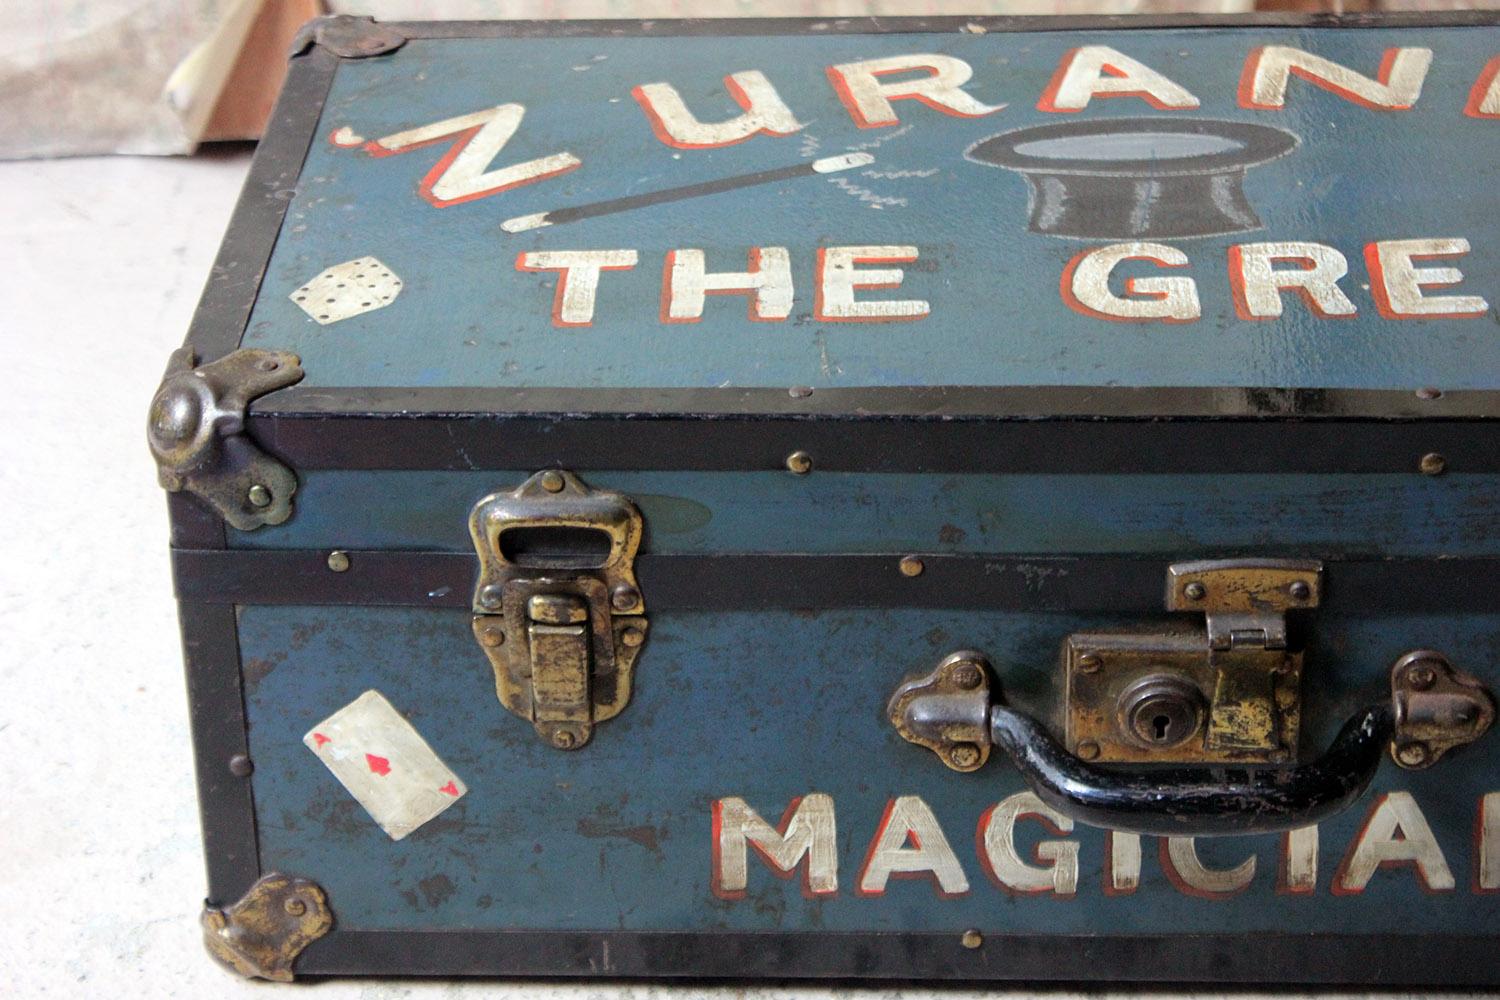 The hand painted magicians travelling suitcase painted in teal with a top hat, wand, die, three magic rings, balloons and playing cards, and signwritten 